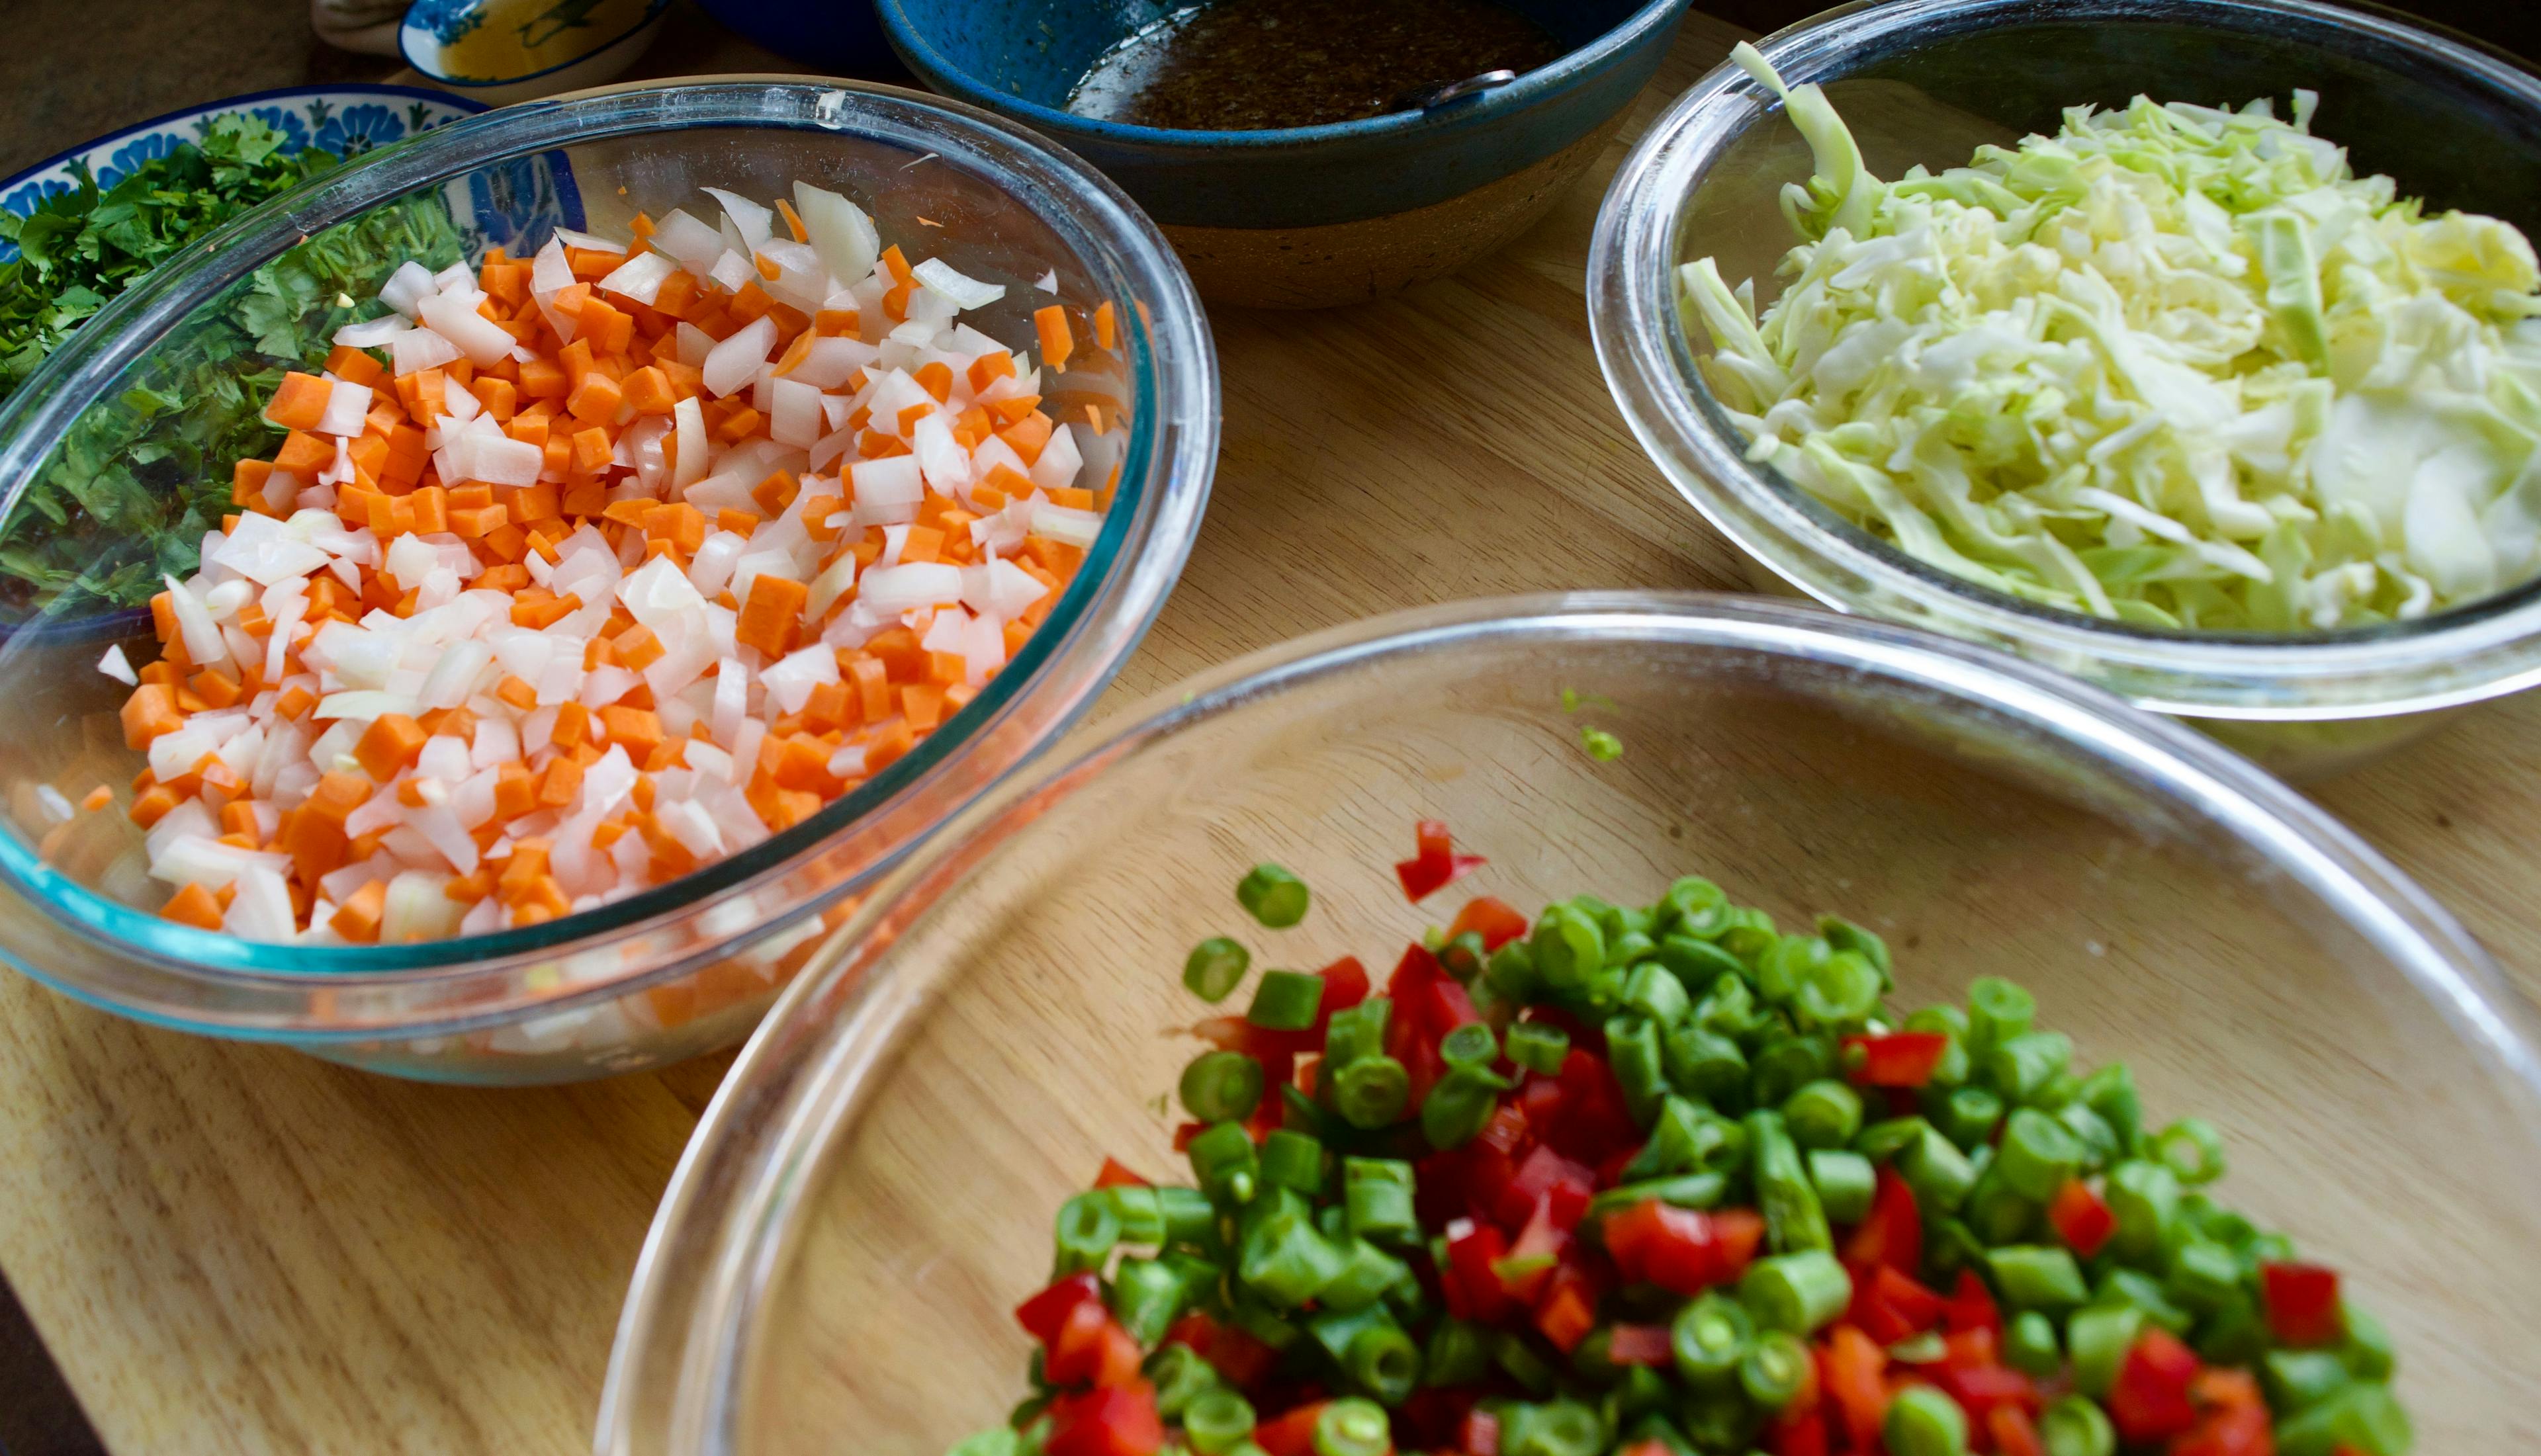 Diced veggies in clear glass bowls.